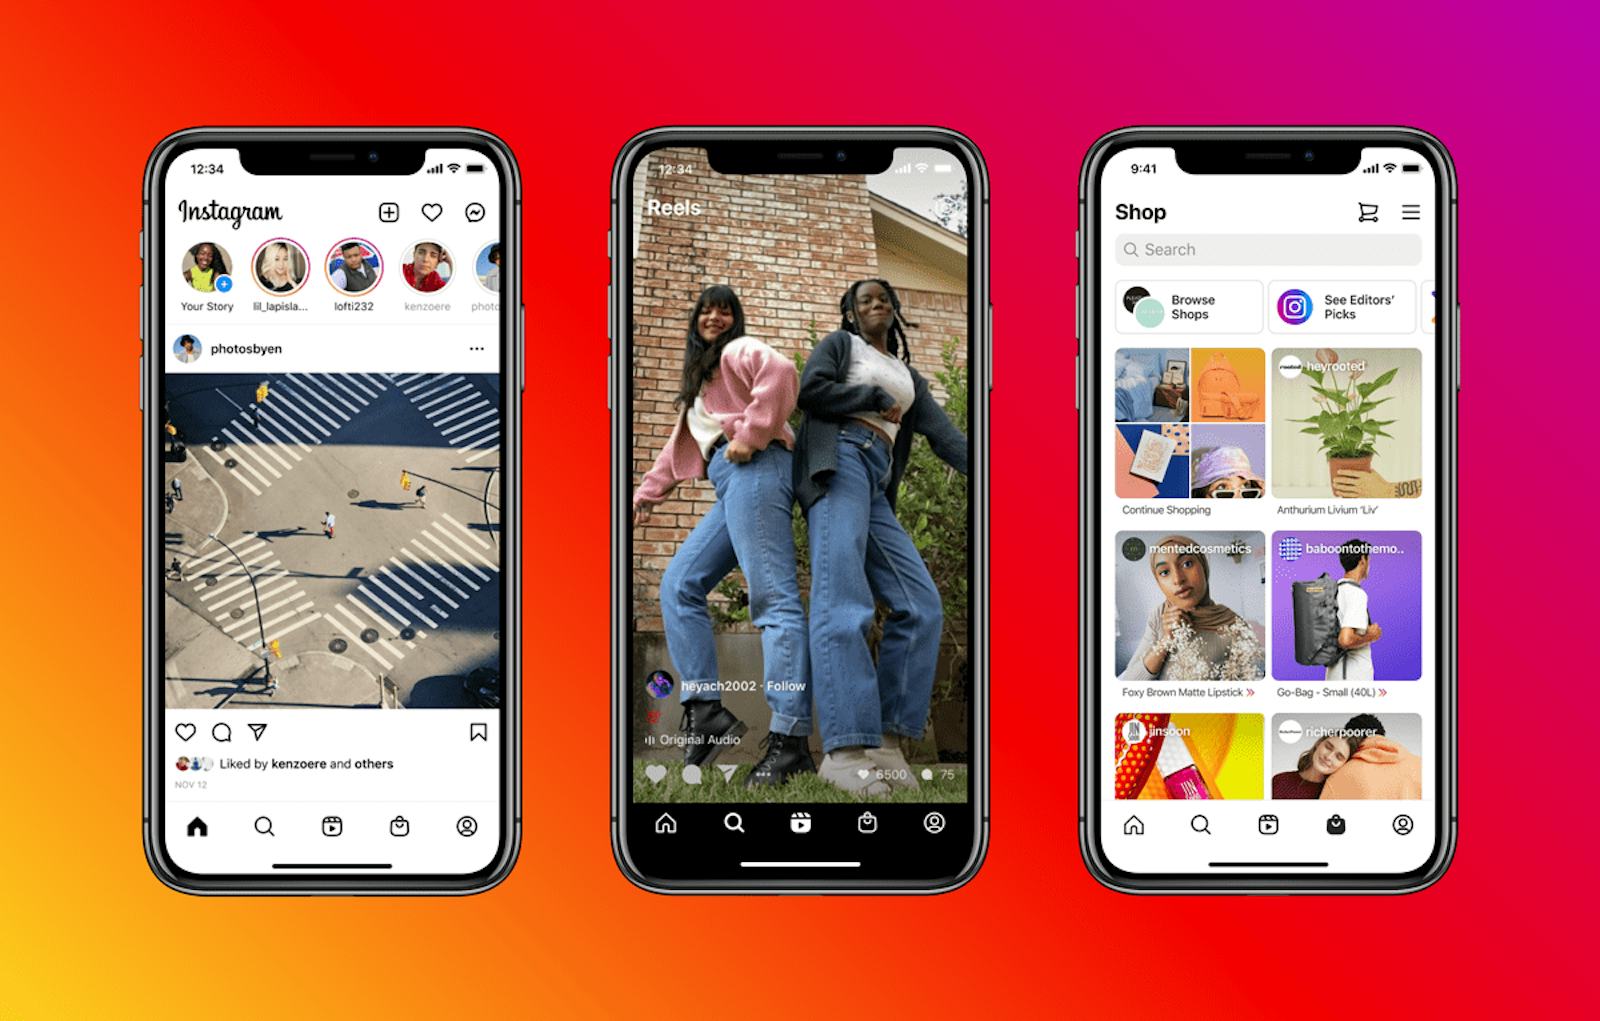 How To Get Instagram Reels, The App's New Short-Form Video Feature